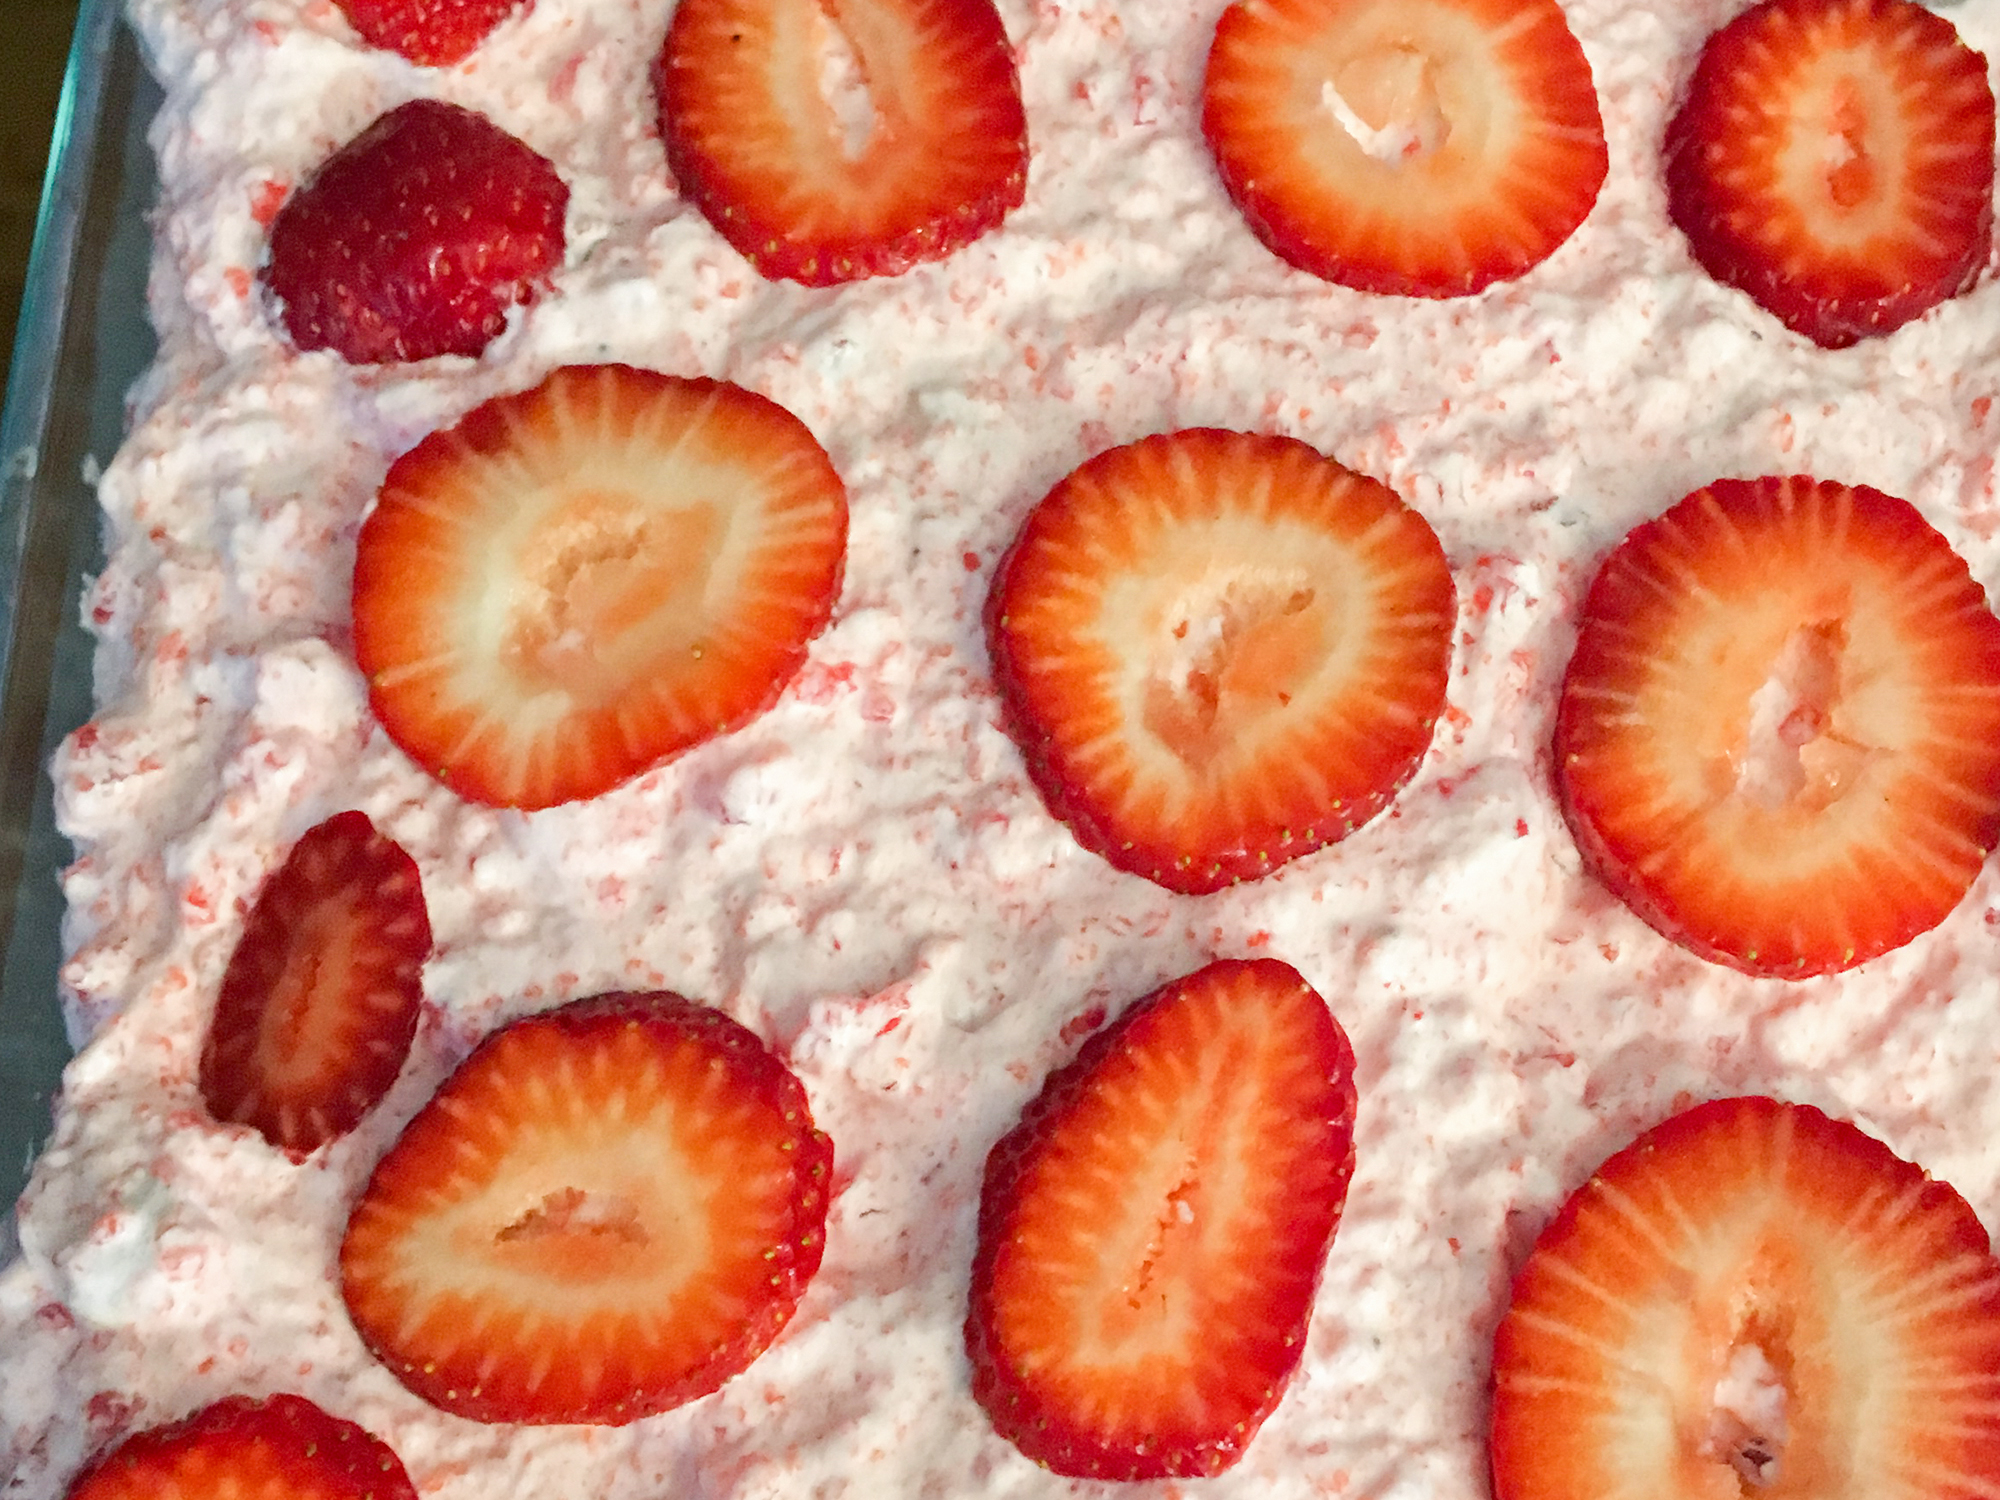 close up view of Strawberry Whip garnished with strawberry slices in a glass baking dish